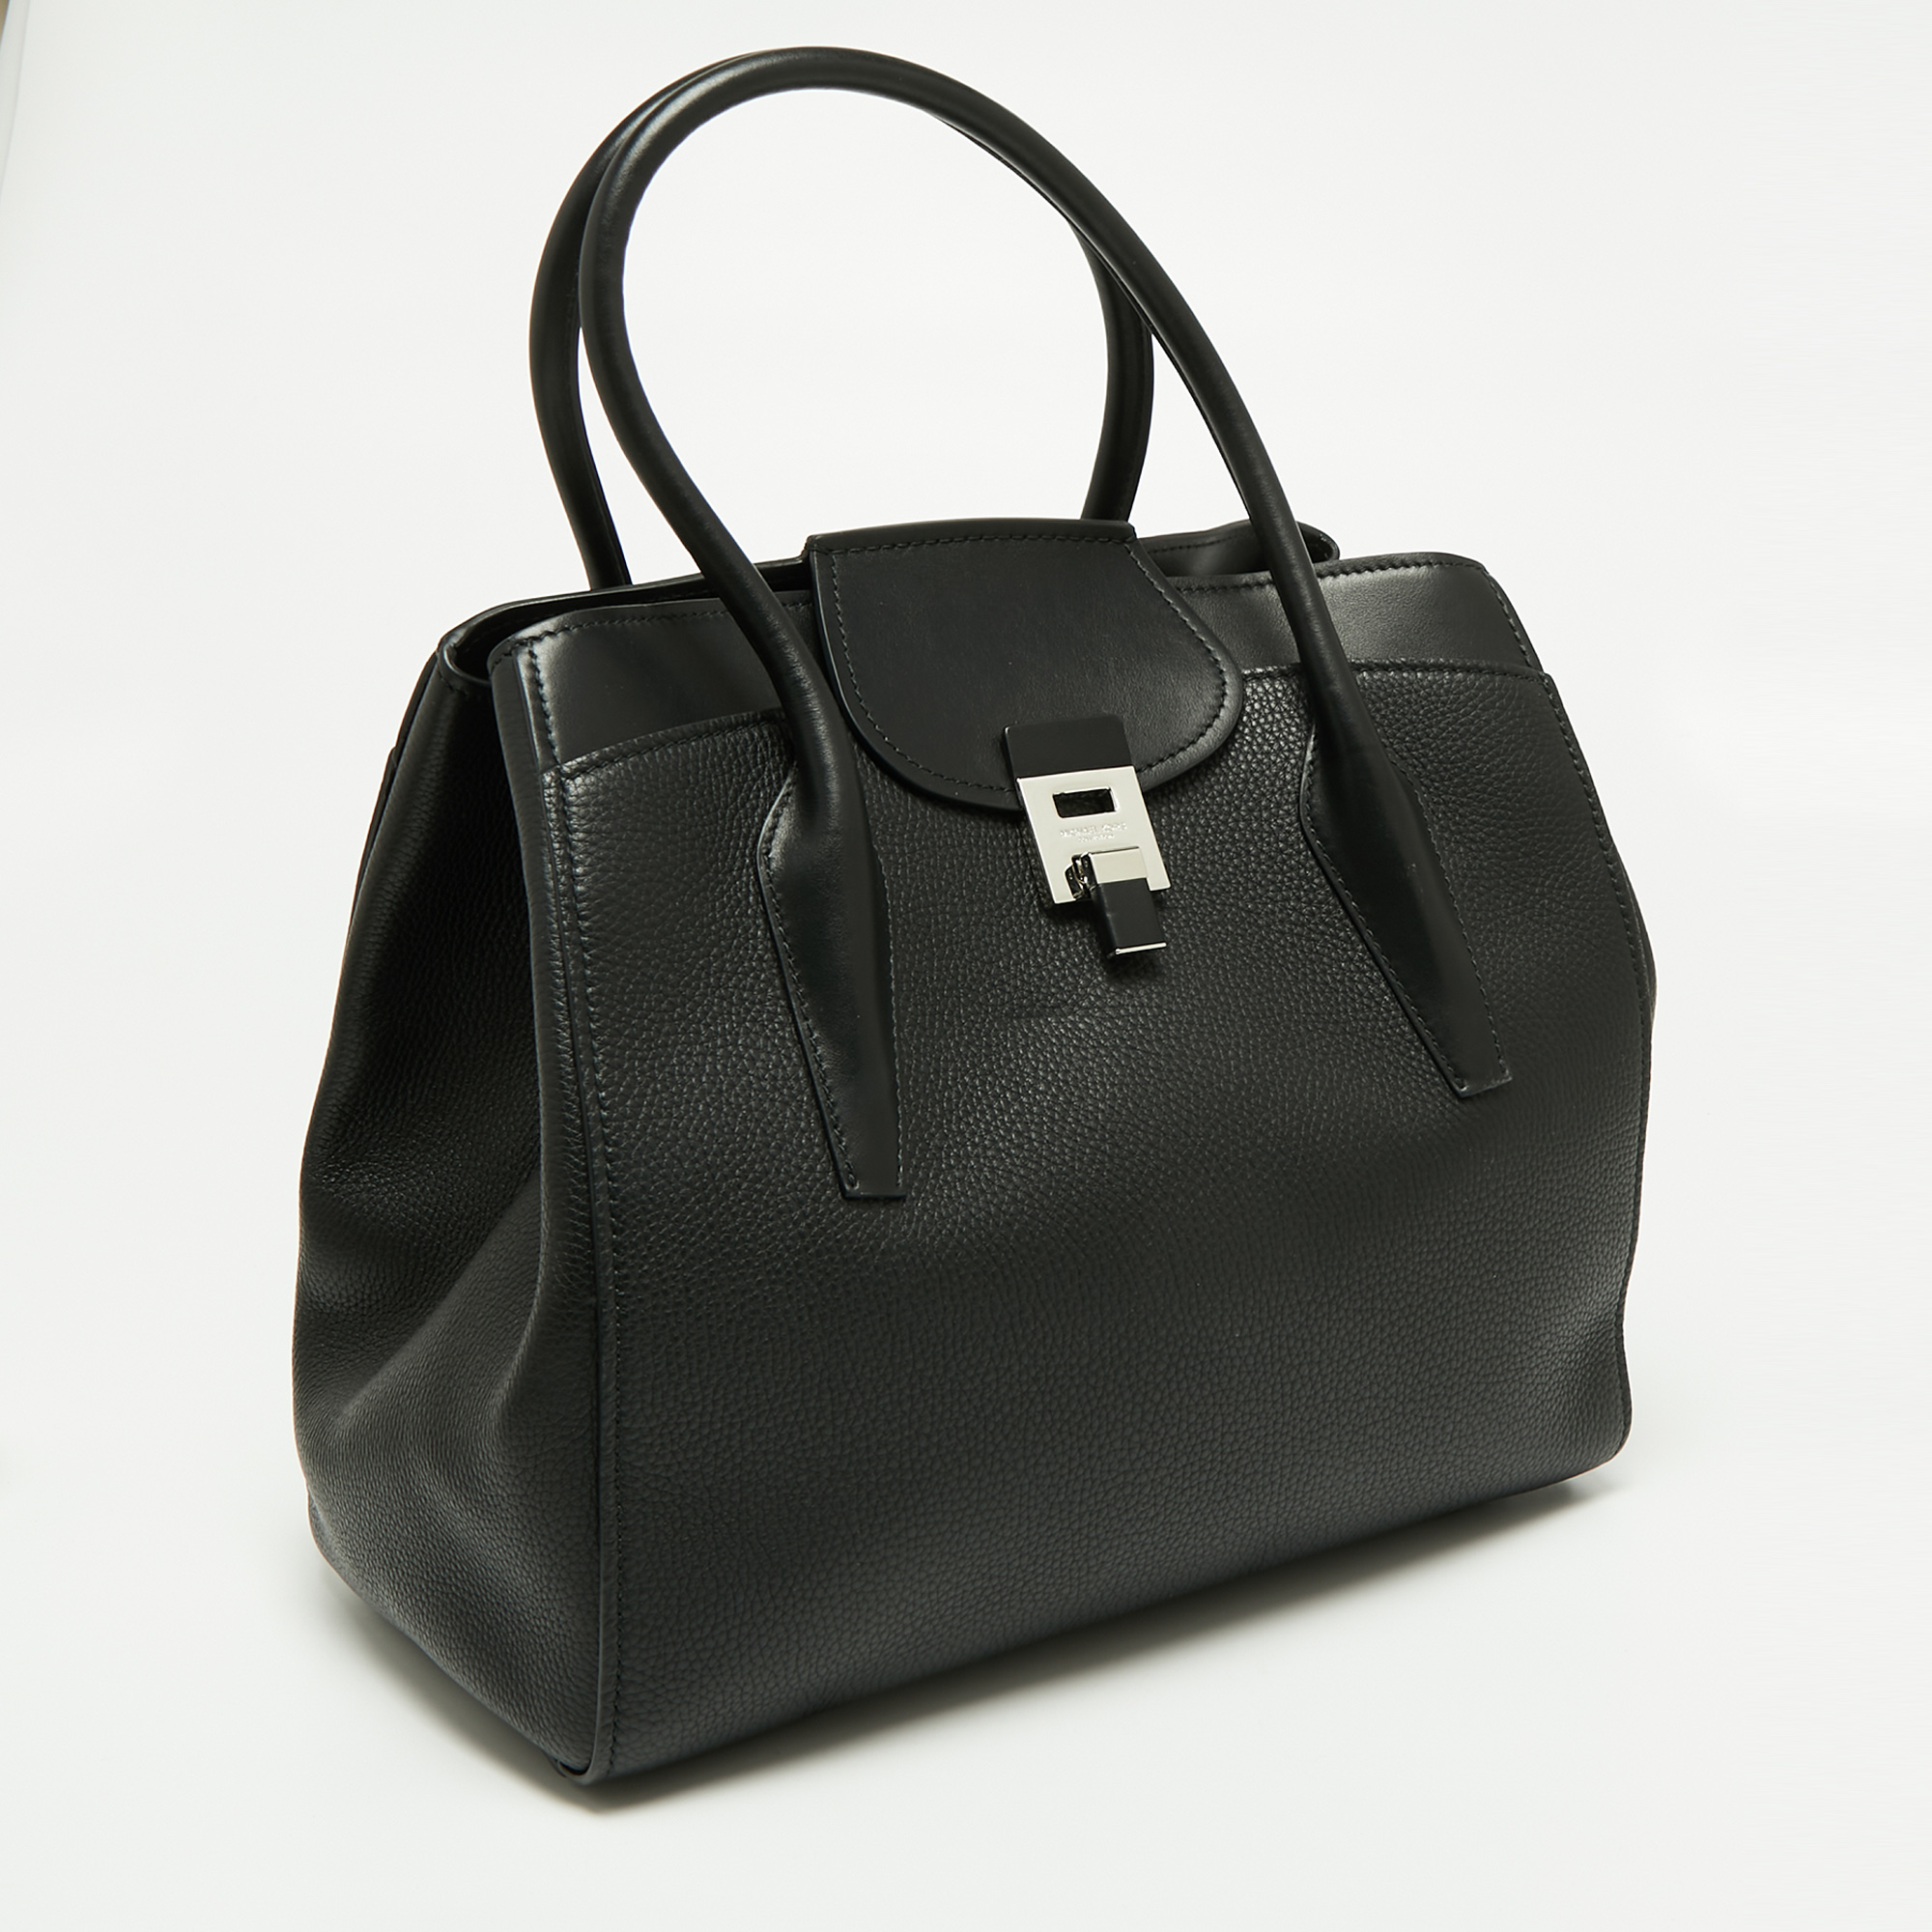 Michael Kors Collection Black Leather Blancroft Tote